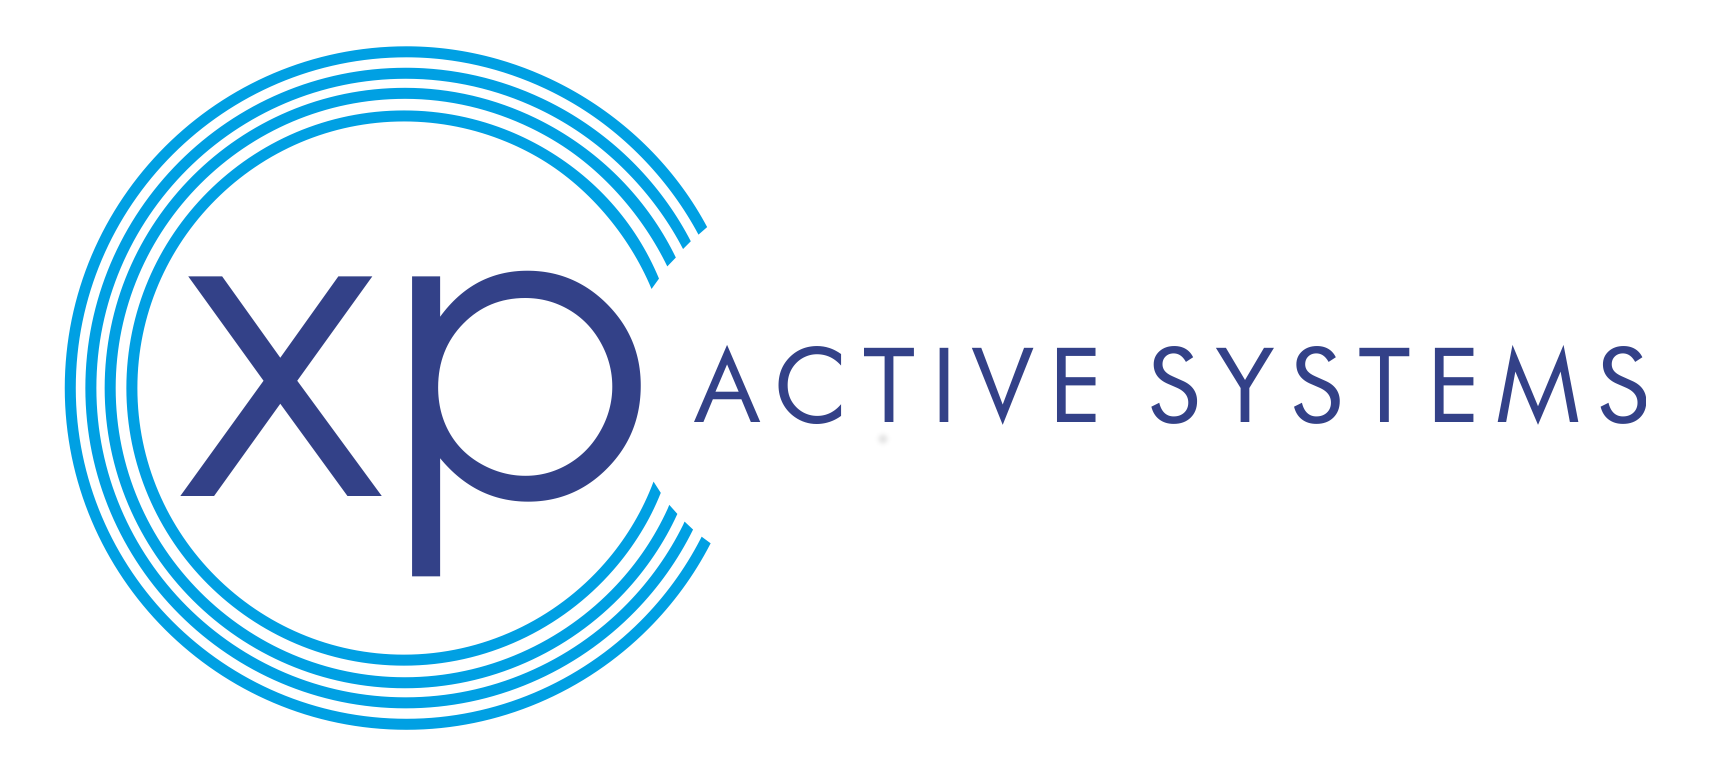 XPS- XP Active Systems